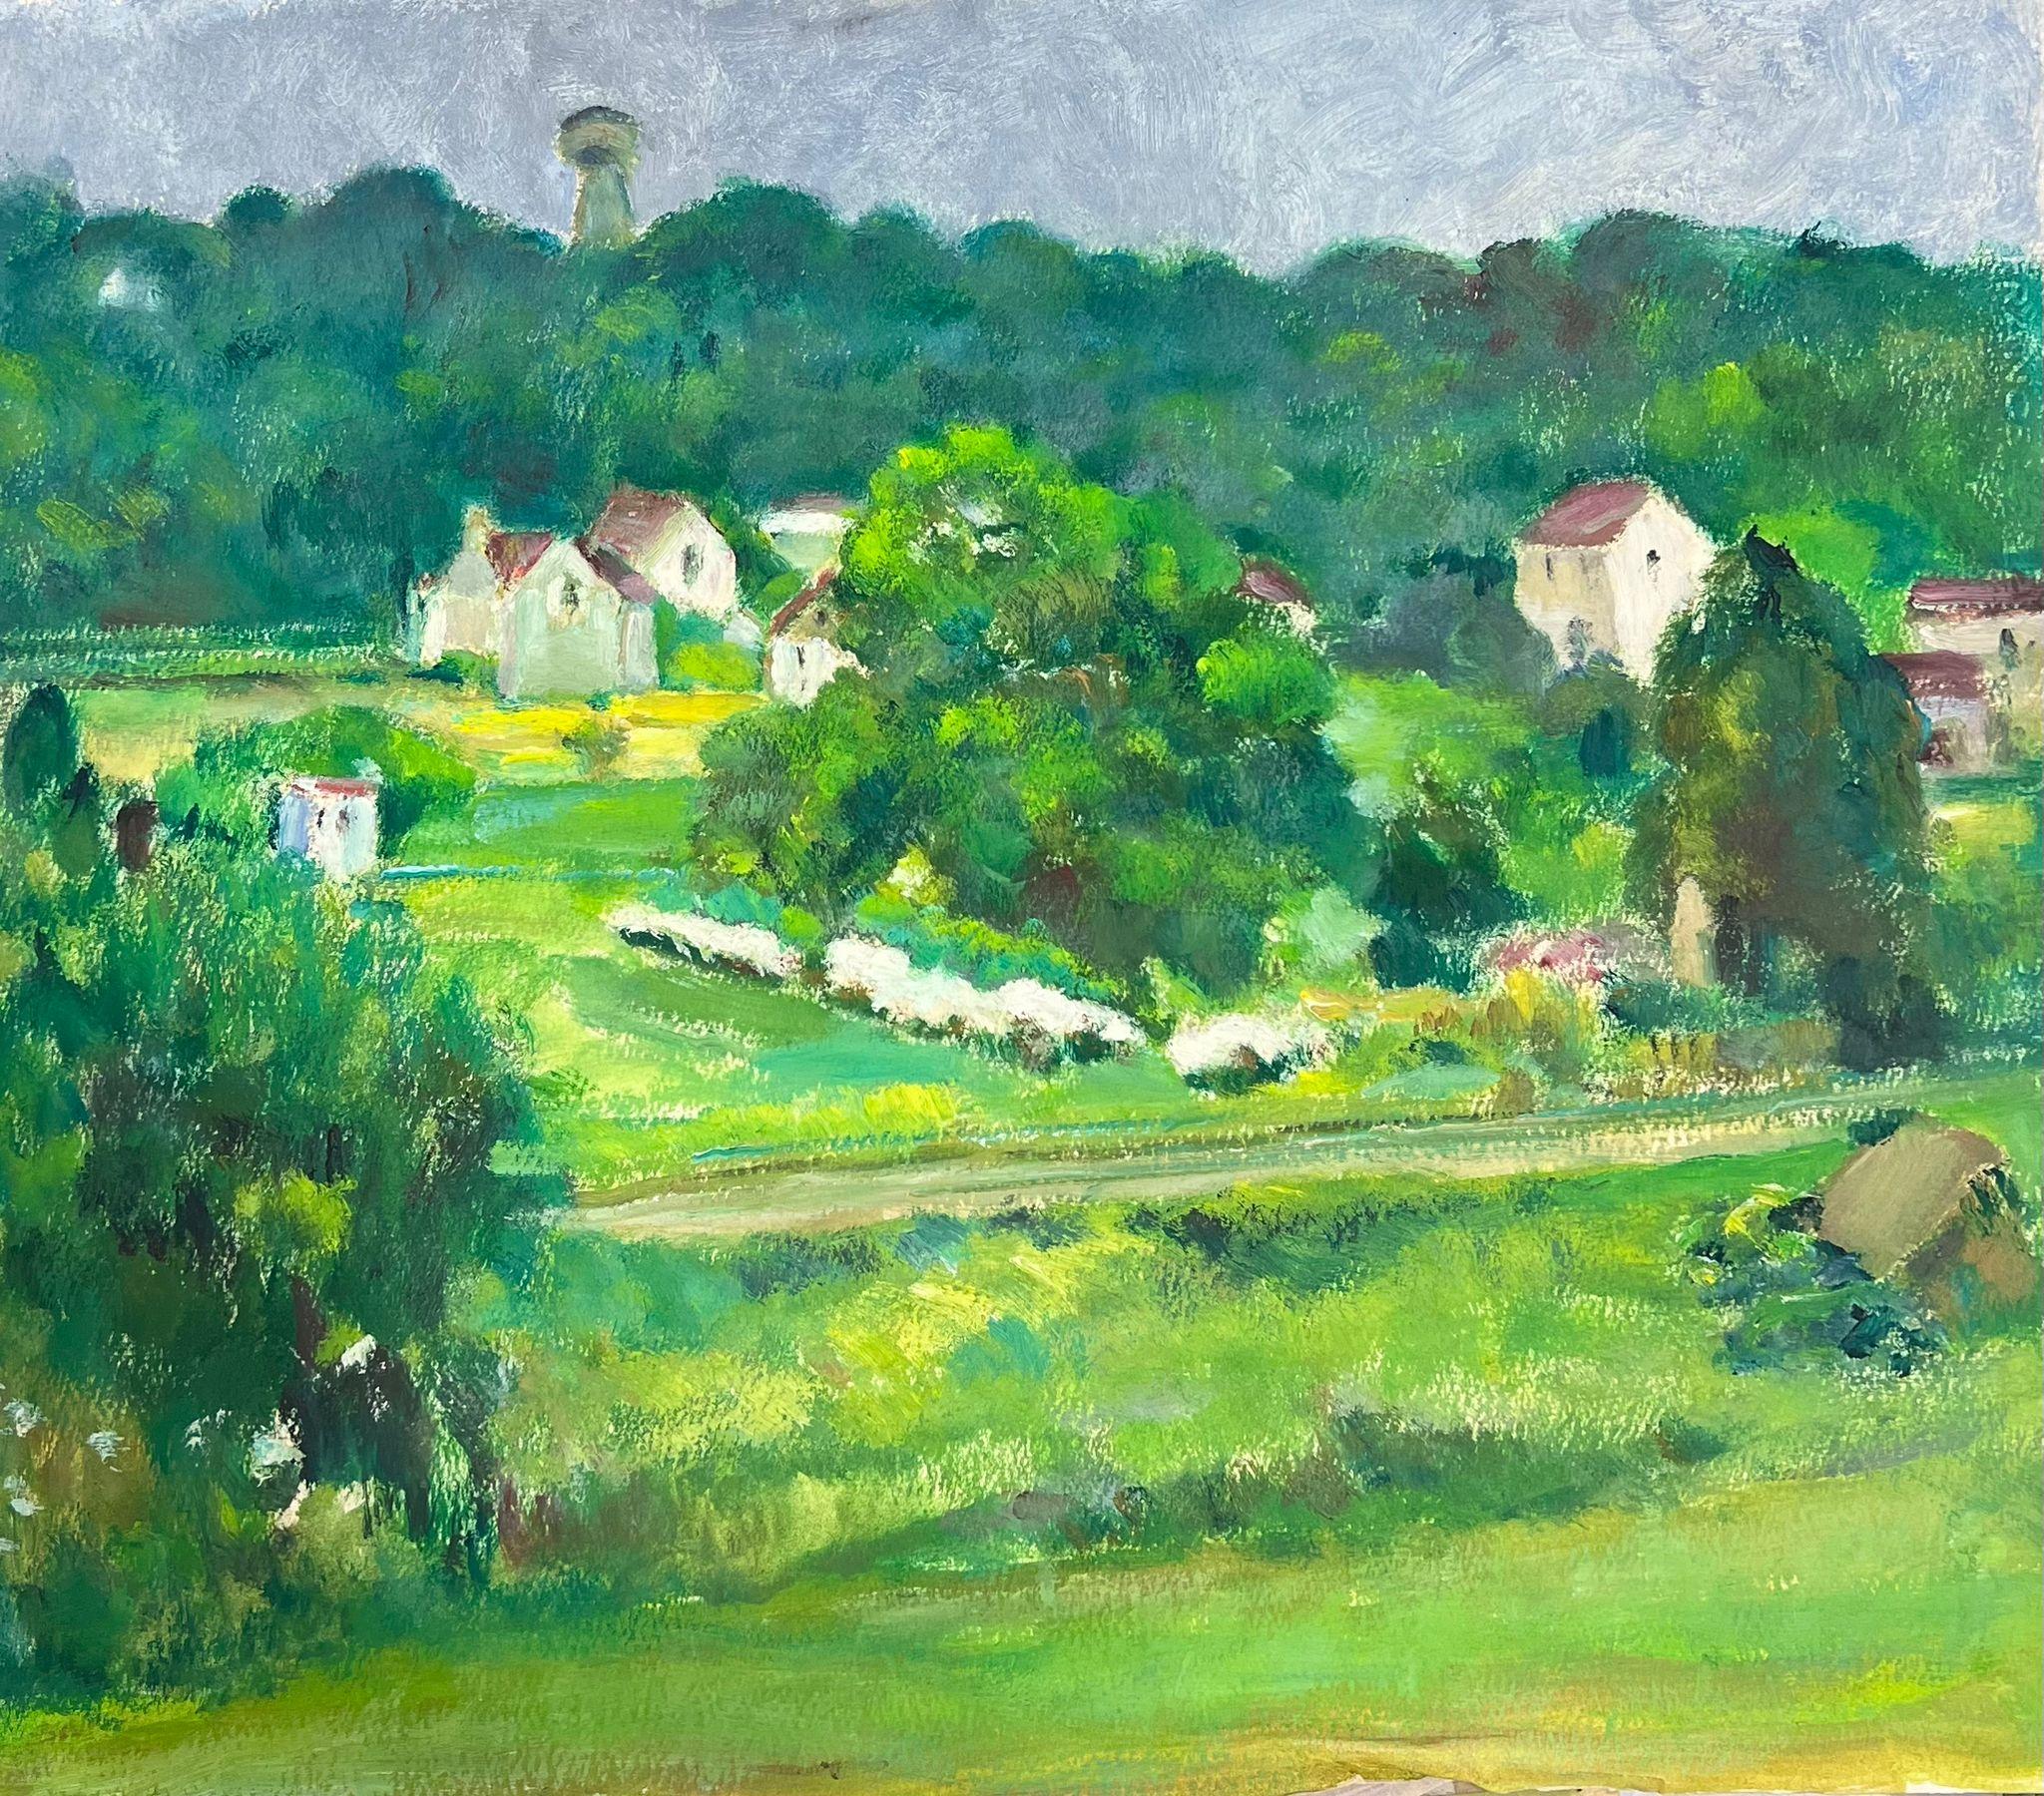 Louise Alix Landscape Painting - Red Roof Village In Bright Green Field Landscape's French Landscape